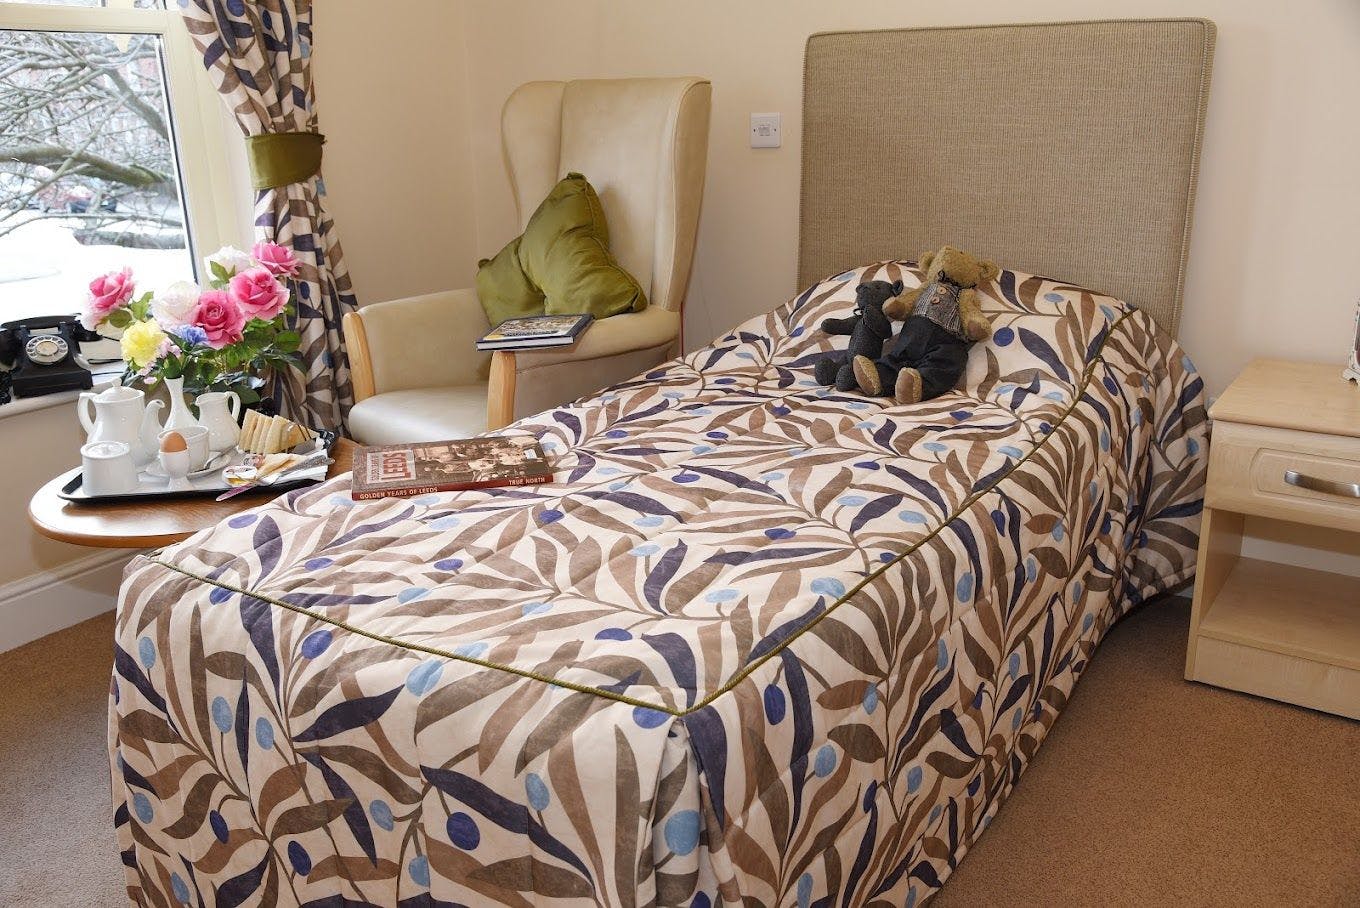 Bedroom at Sunnyview House Care Home in Leeds, West Yorkshire